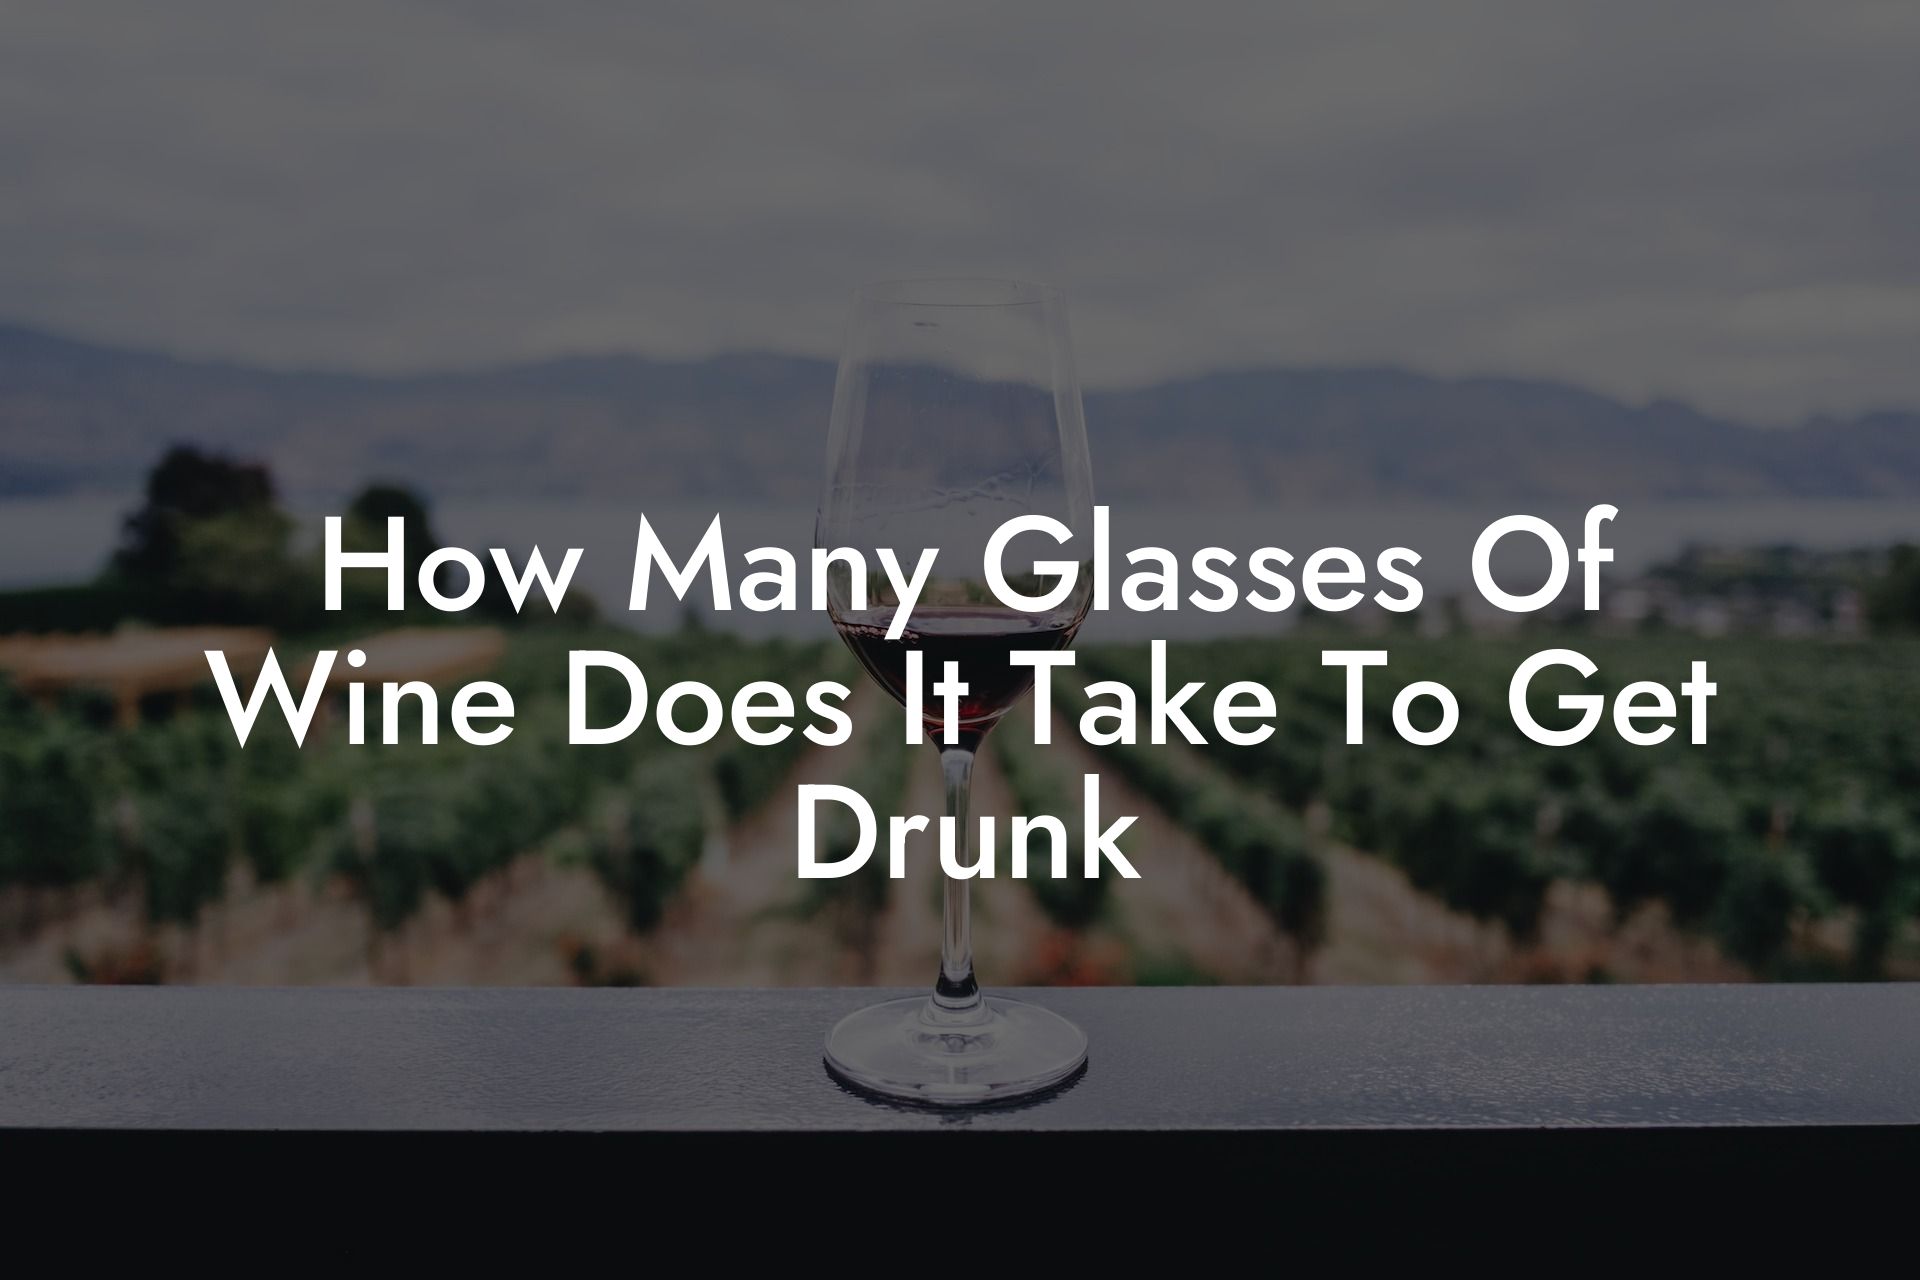 How Many Glasses Of Wine Does It Take To Get Drunk